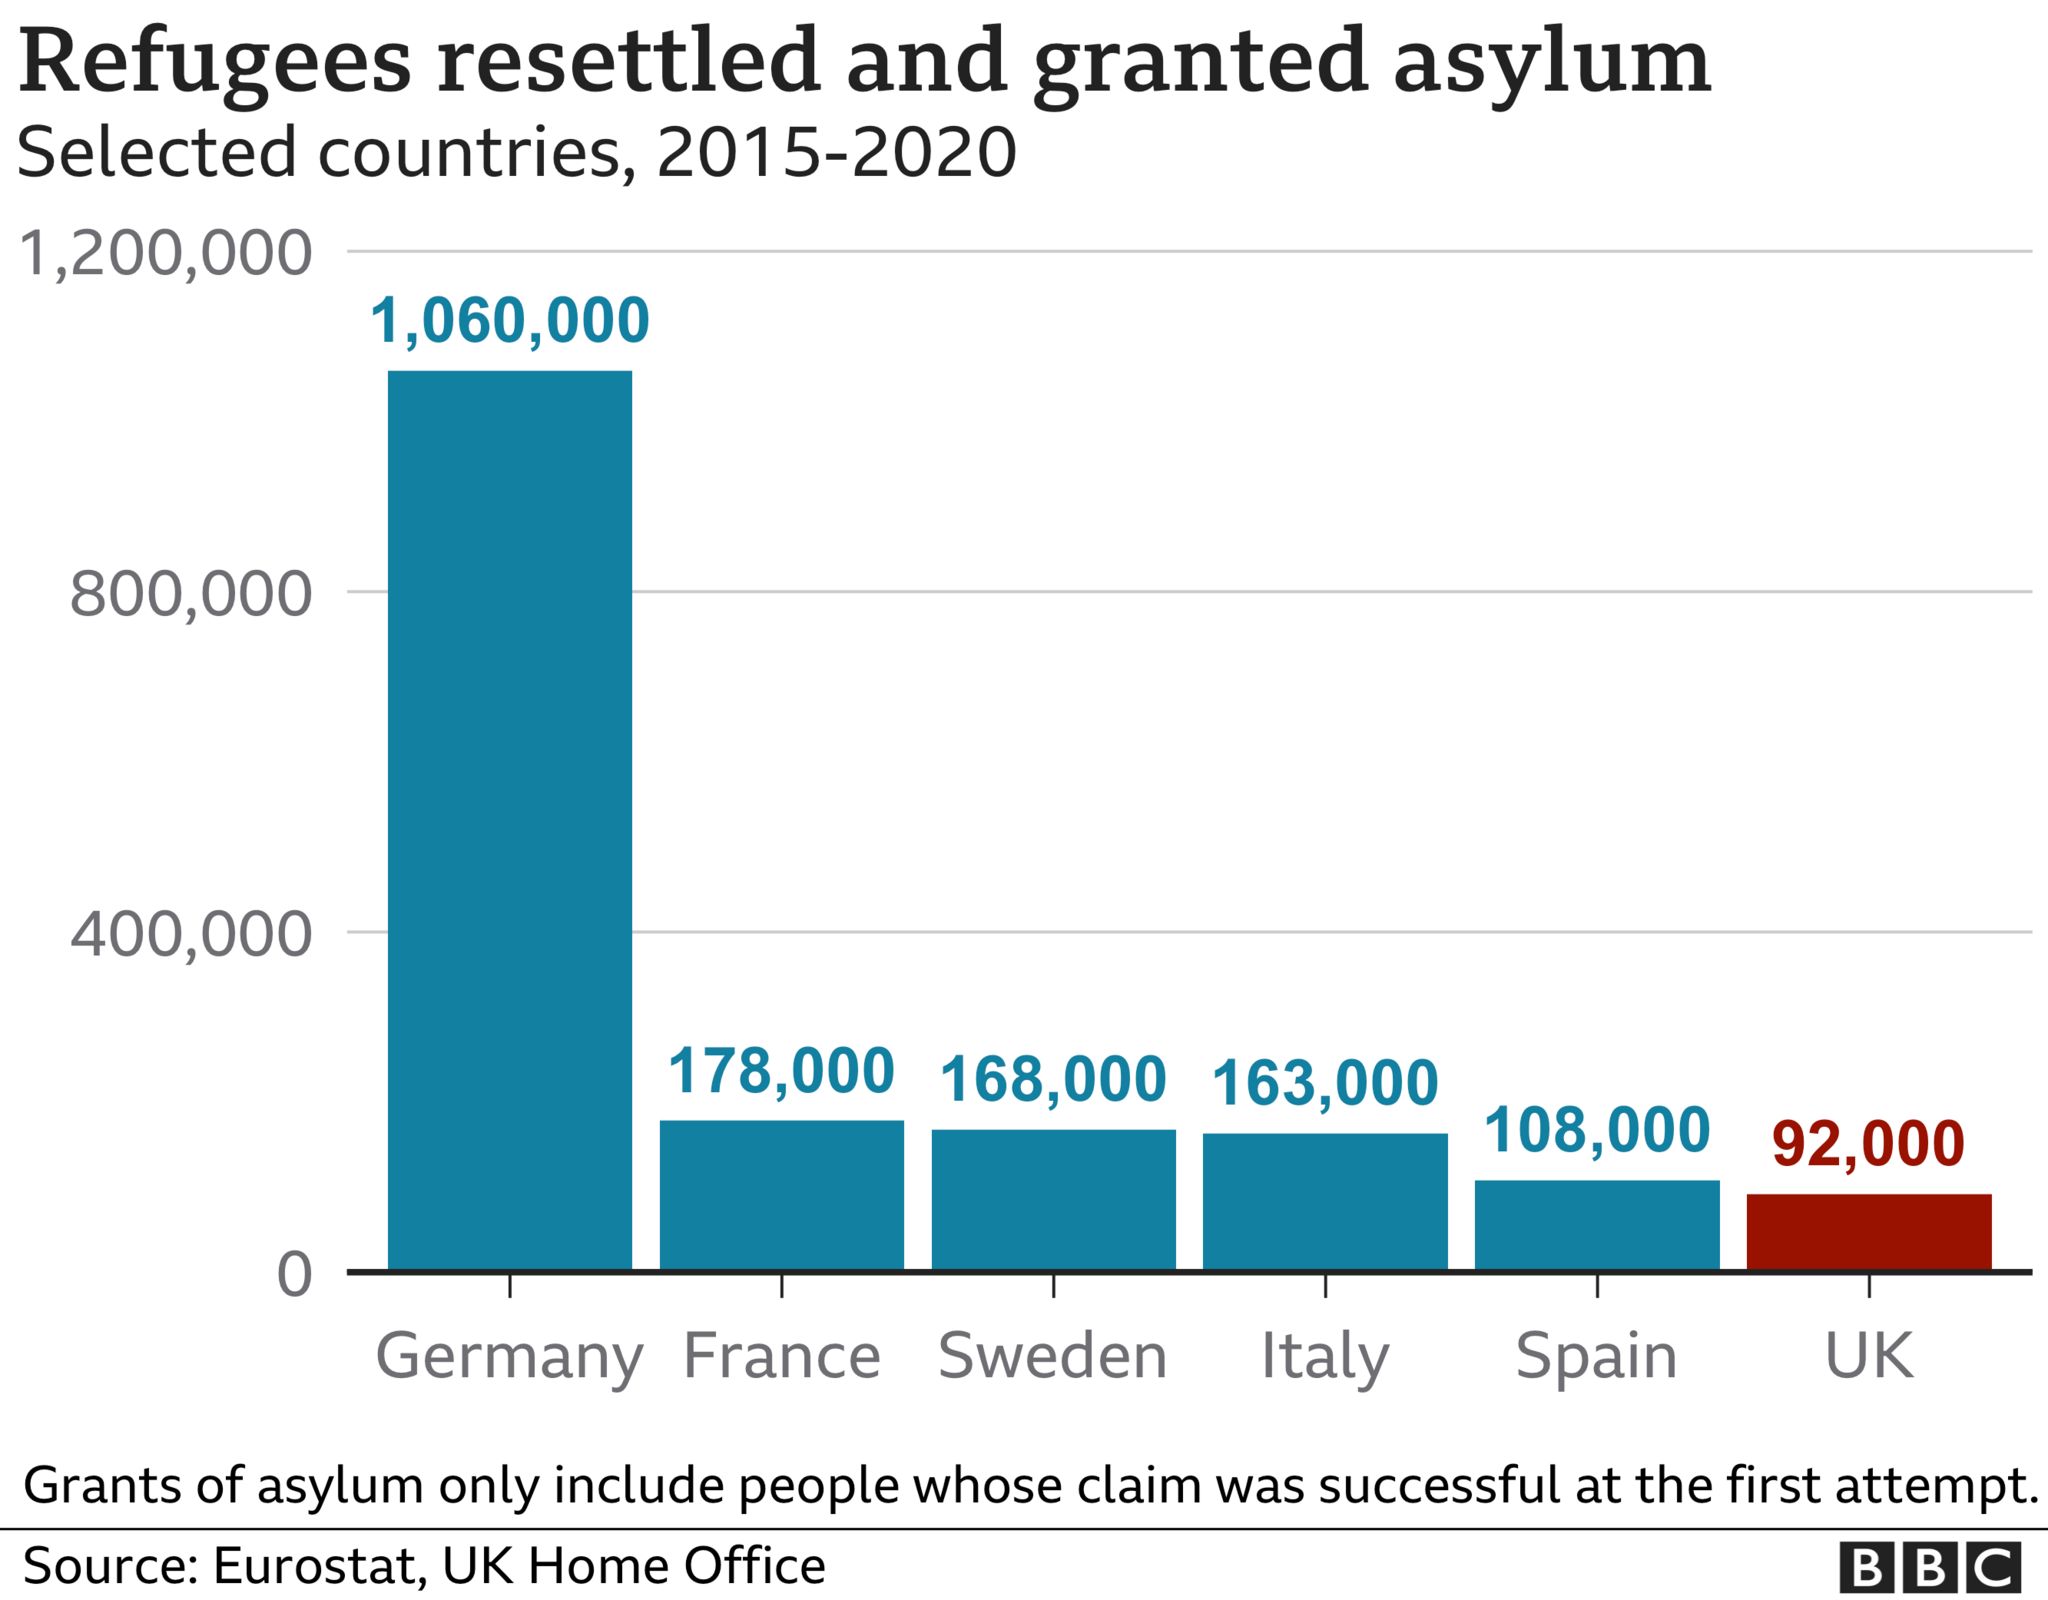 Chart showing the number of resettled refugees and those who were granted asylum 2015-2020 for Germany, UK, Sweden, France, Italy and Spain